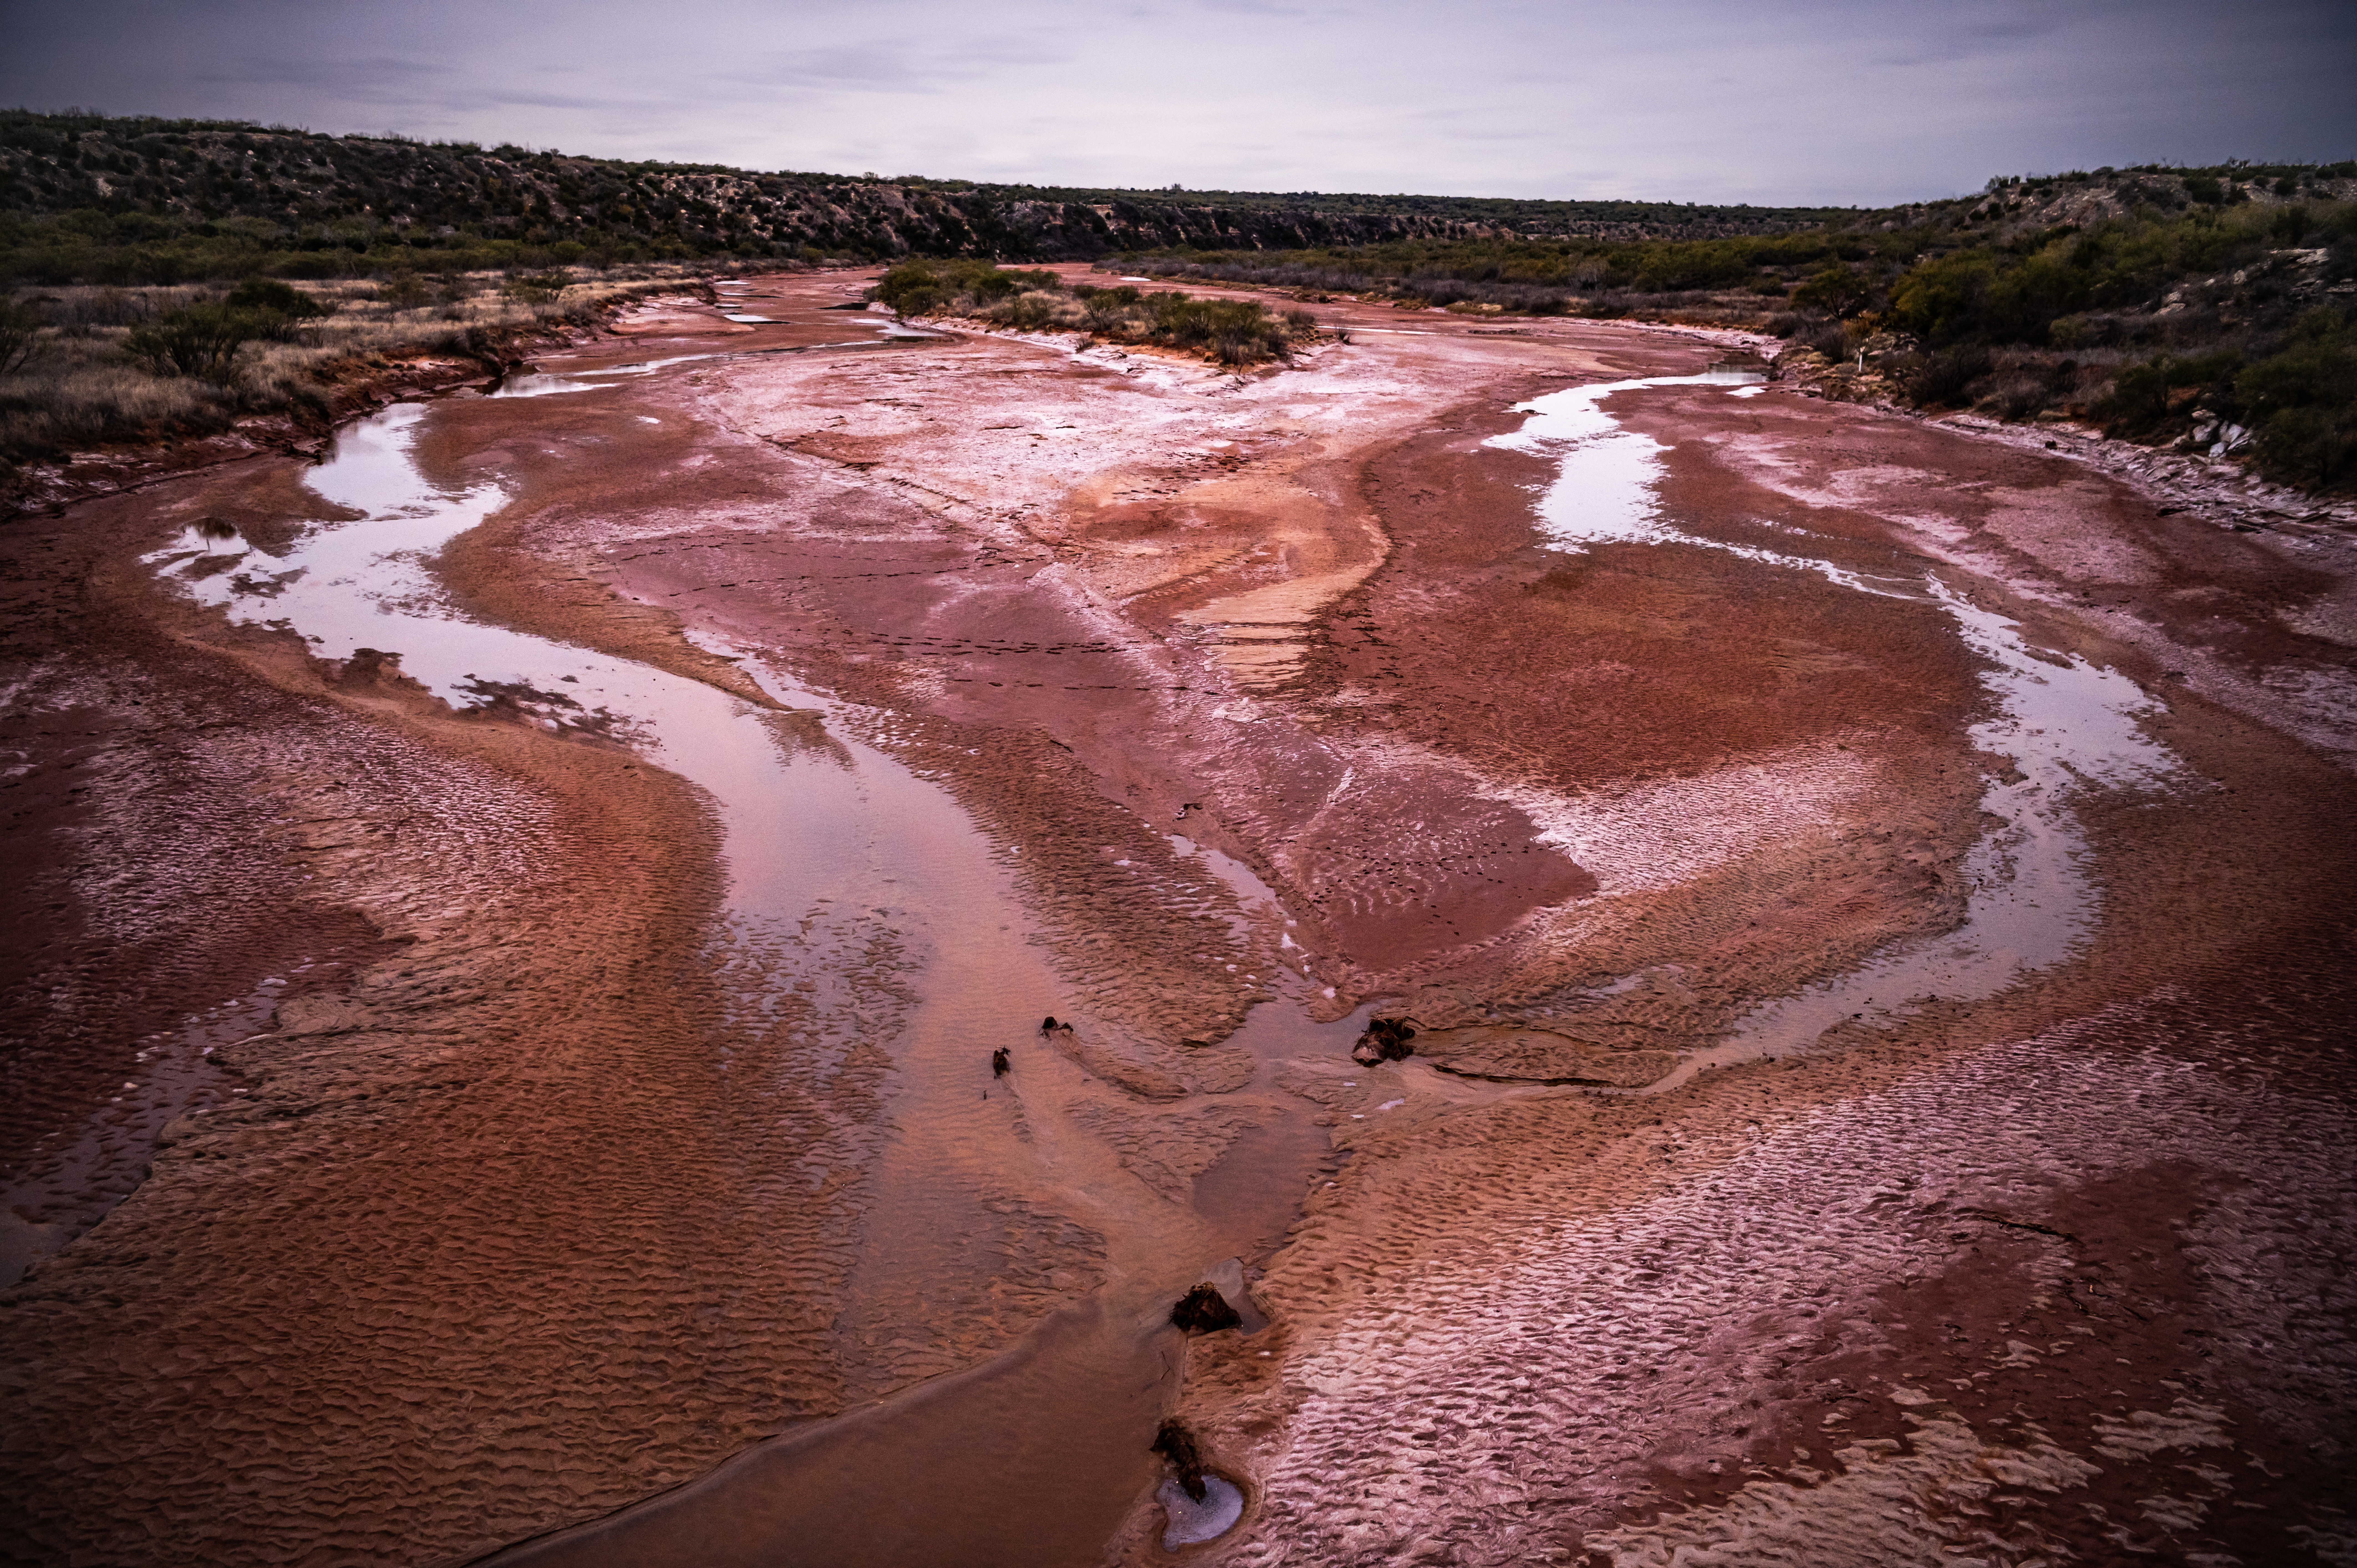 A broad expanse of waterway that is almost dried up, covered in red mud and puddles.